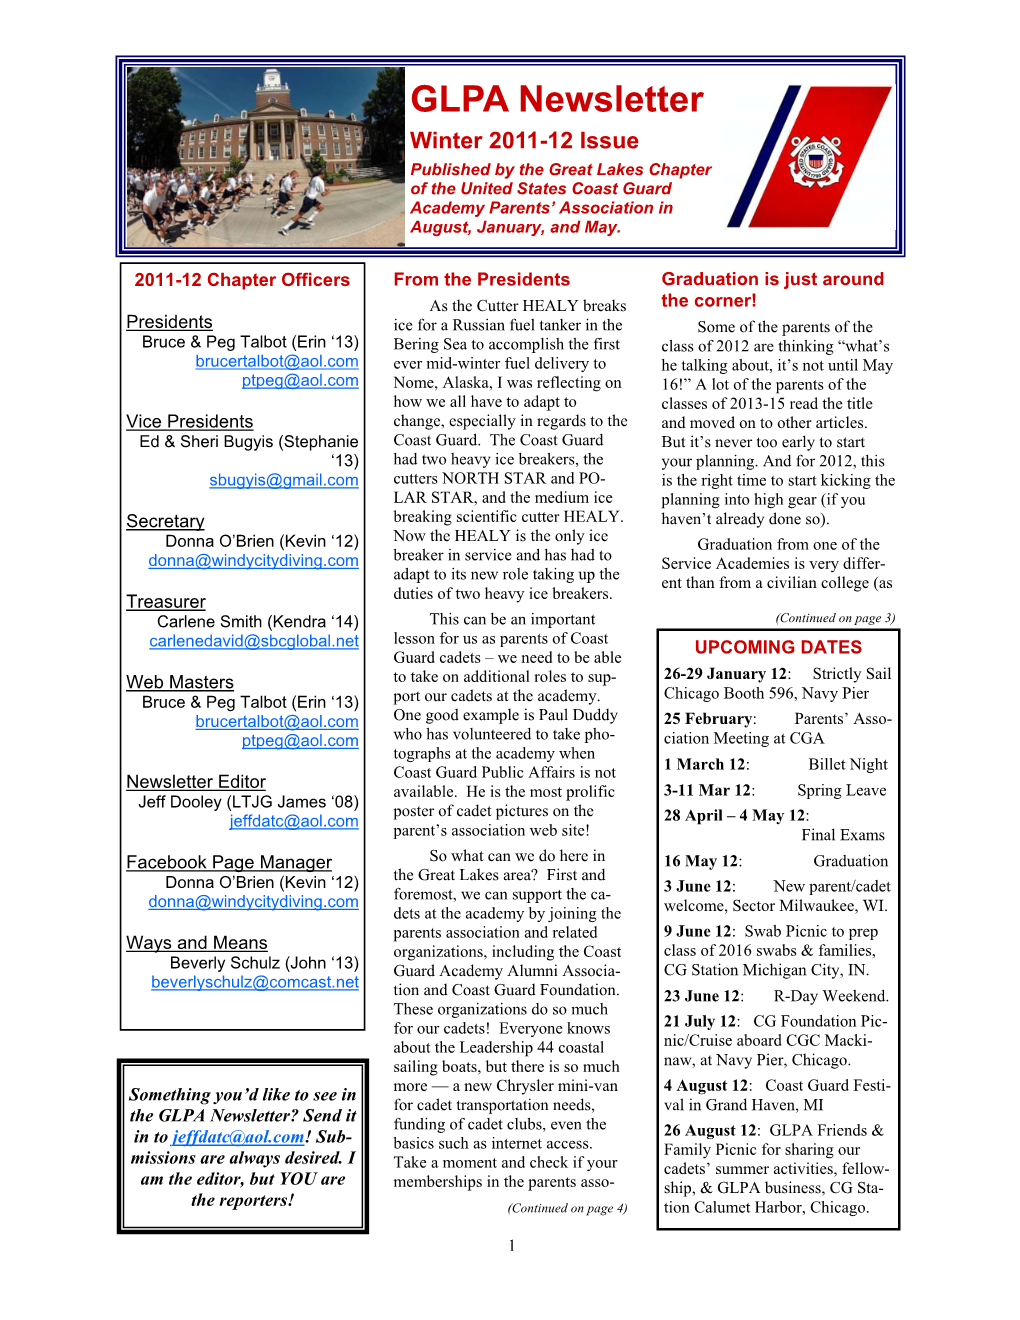 GLPA Newsletter Winter 2011-12 Issue Published by the Great Lakes Chapter of the United States Coast Guard Academy Parents’ Association in August, January, and May